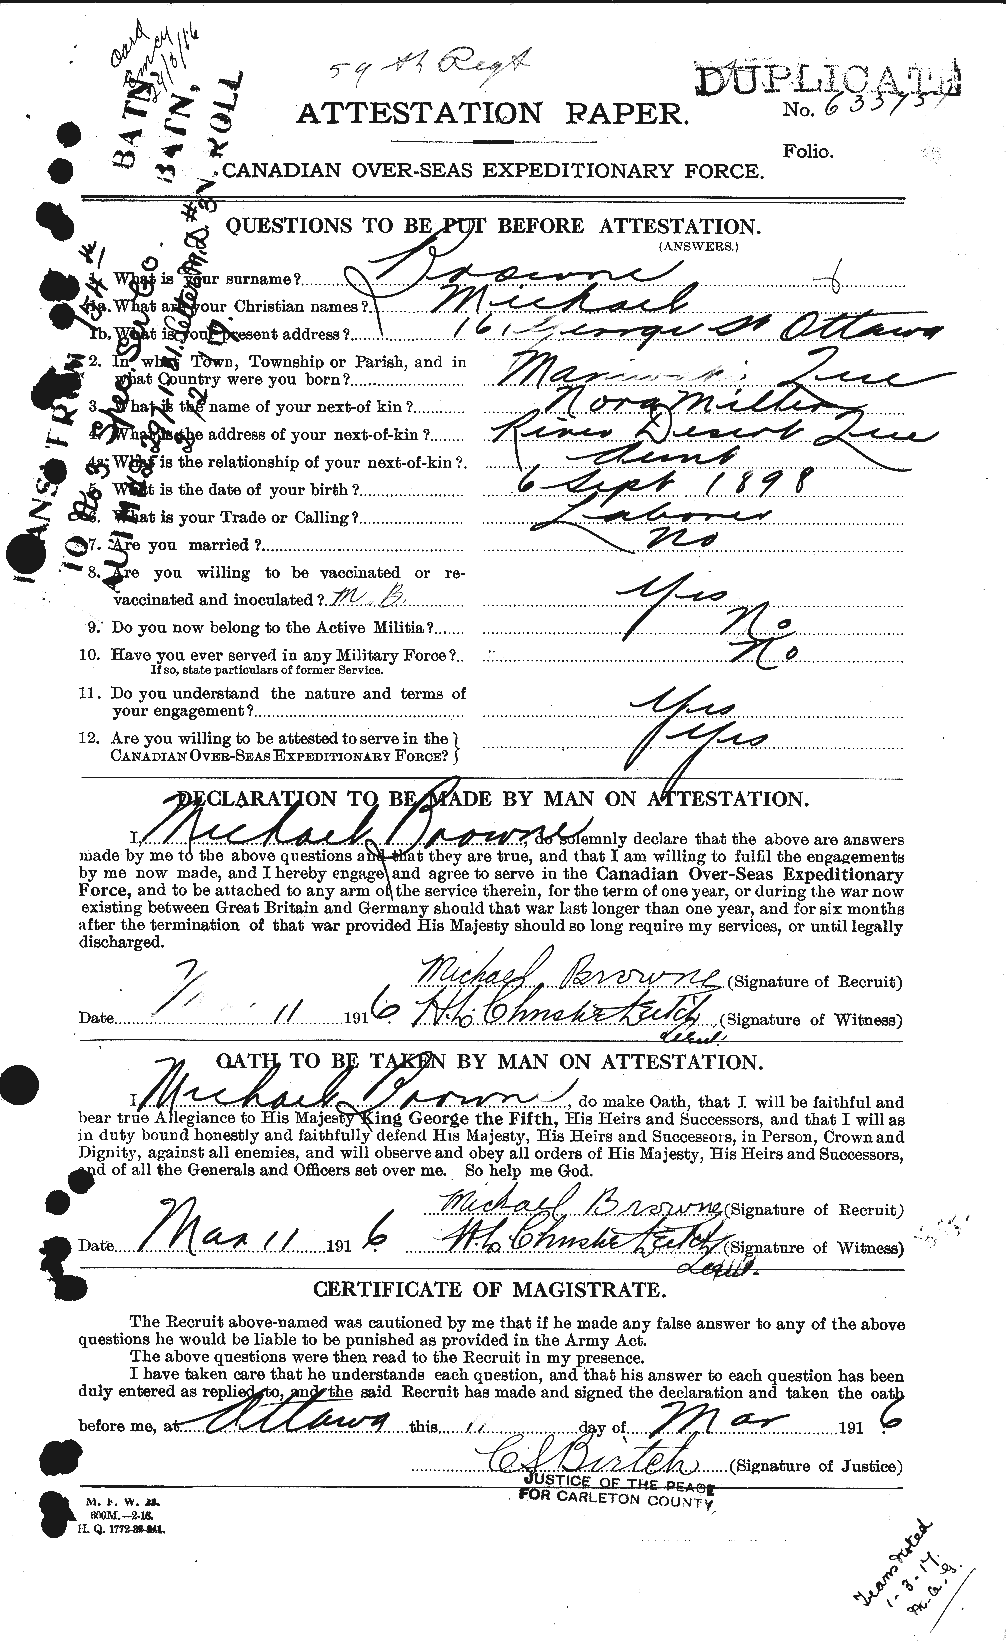 Personnel Records of the First World War - CEF 267060a